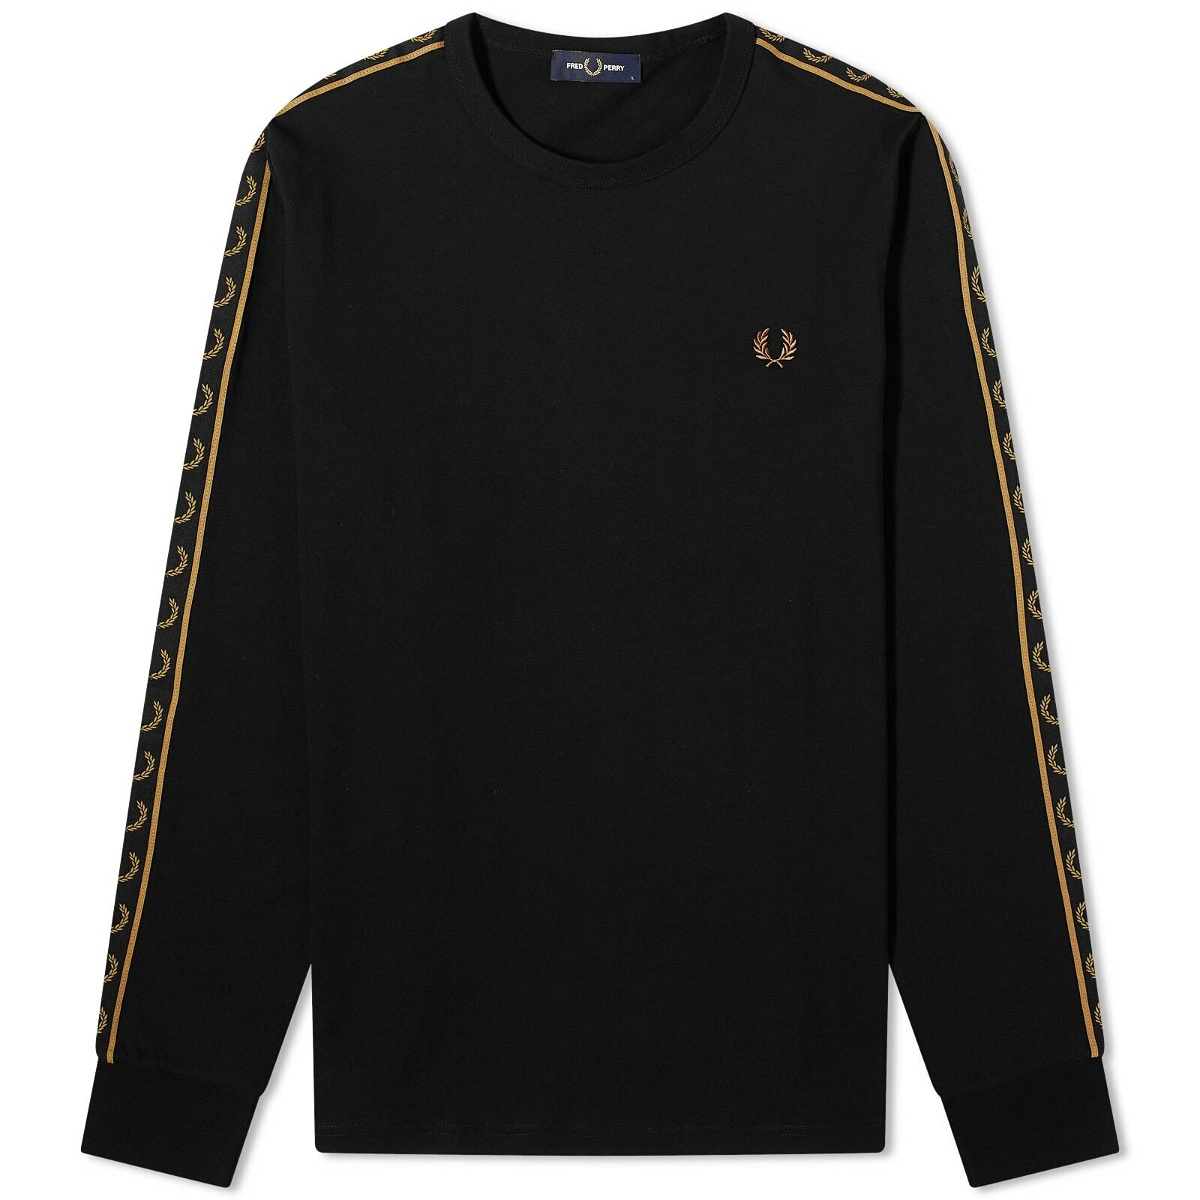 Photo: Fred Perry Men's Long Sleeve Contrast Taped Ringer T-Shirt in Black/Warm Stone